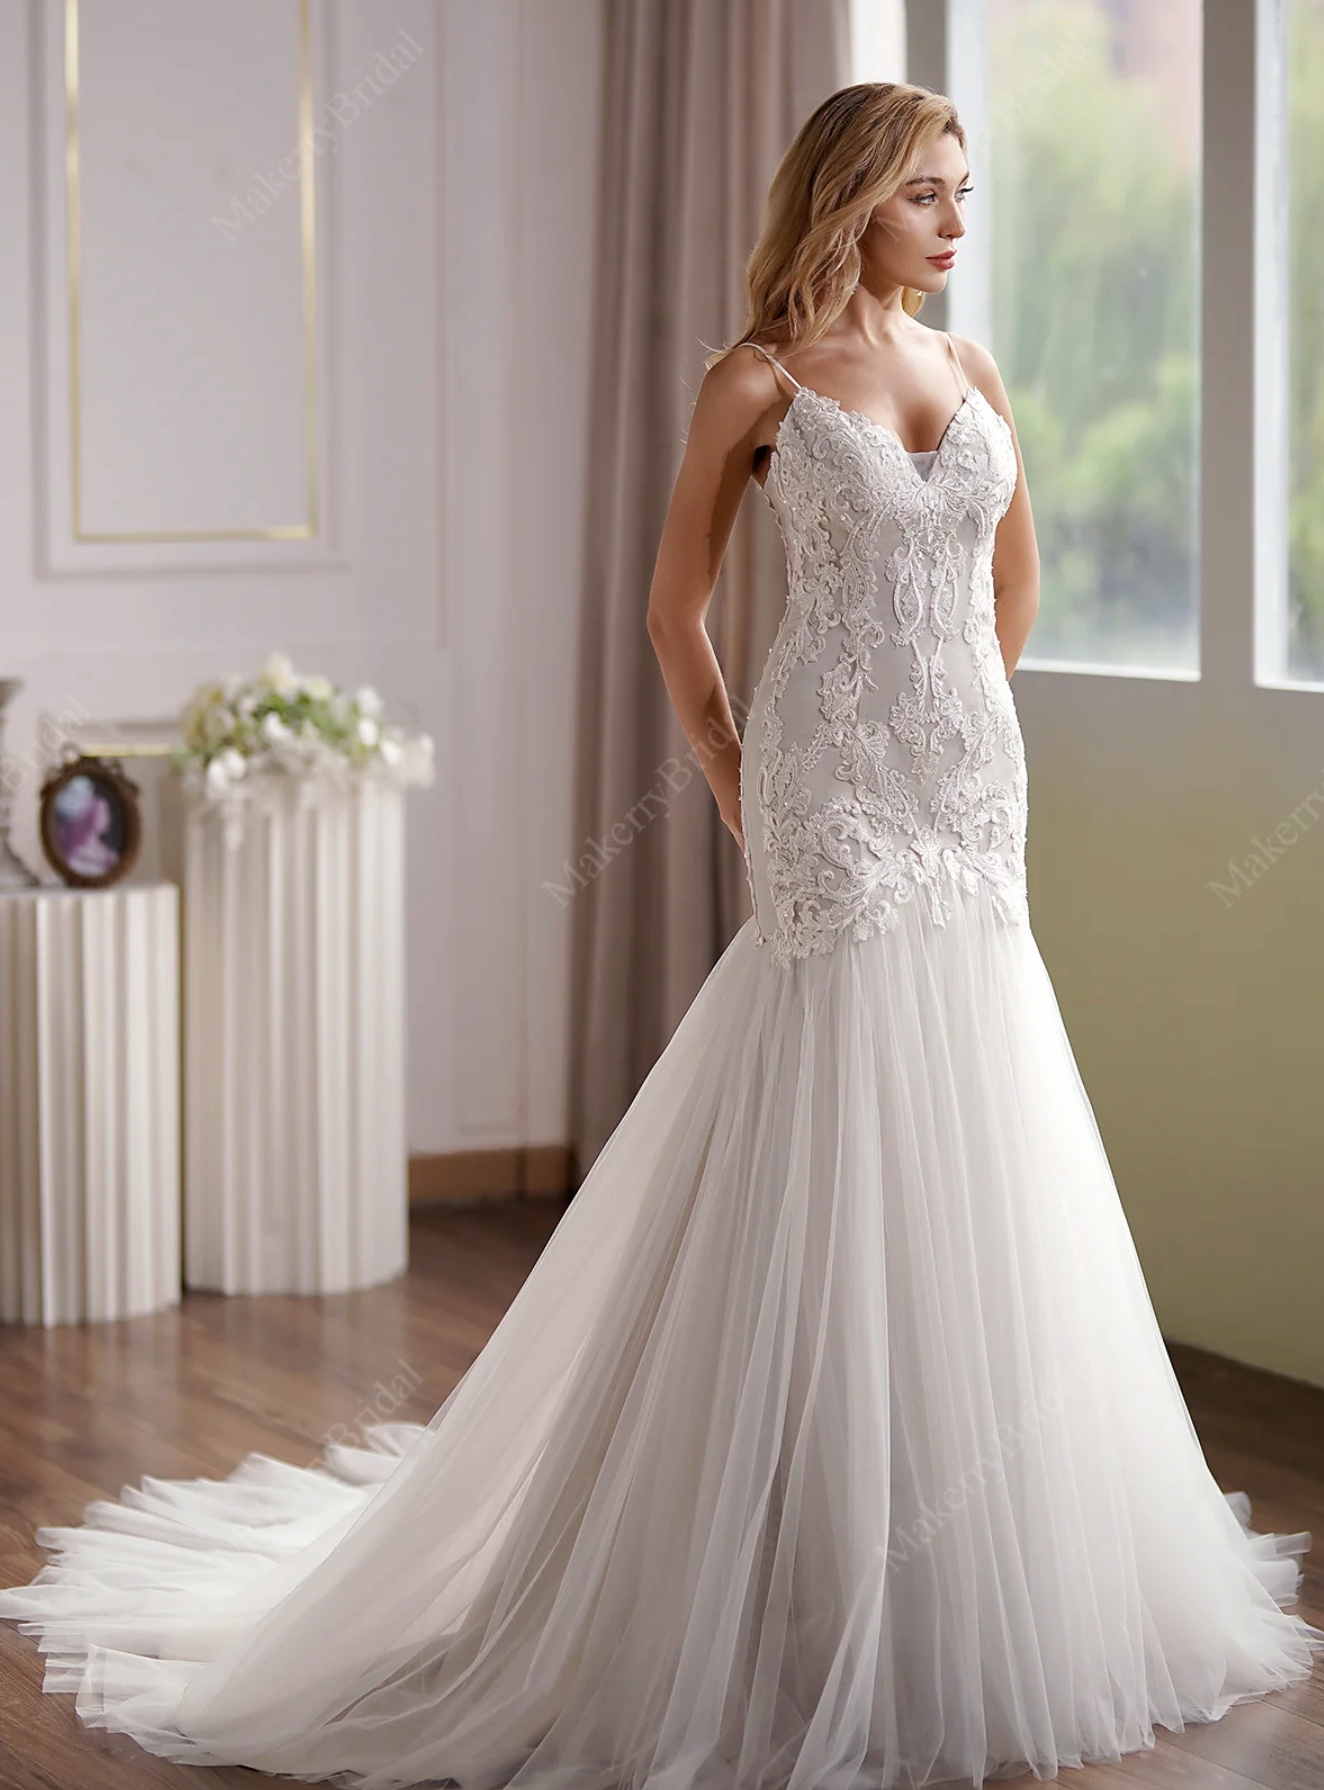 Curve-Hugging Beaded Lace Mermaid Wedding Gown With Breathtaking Illus –  TulleLux Bridal Crowns & Accessories